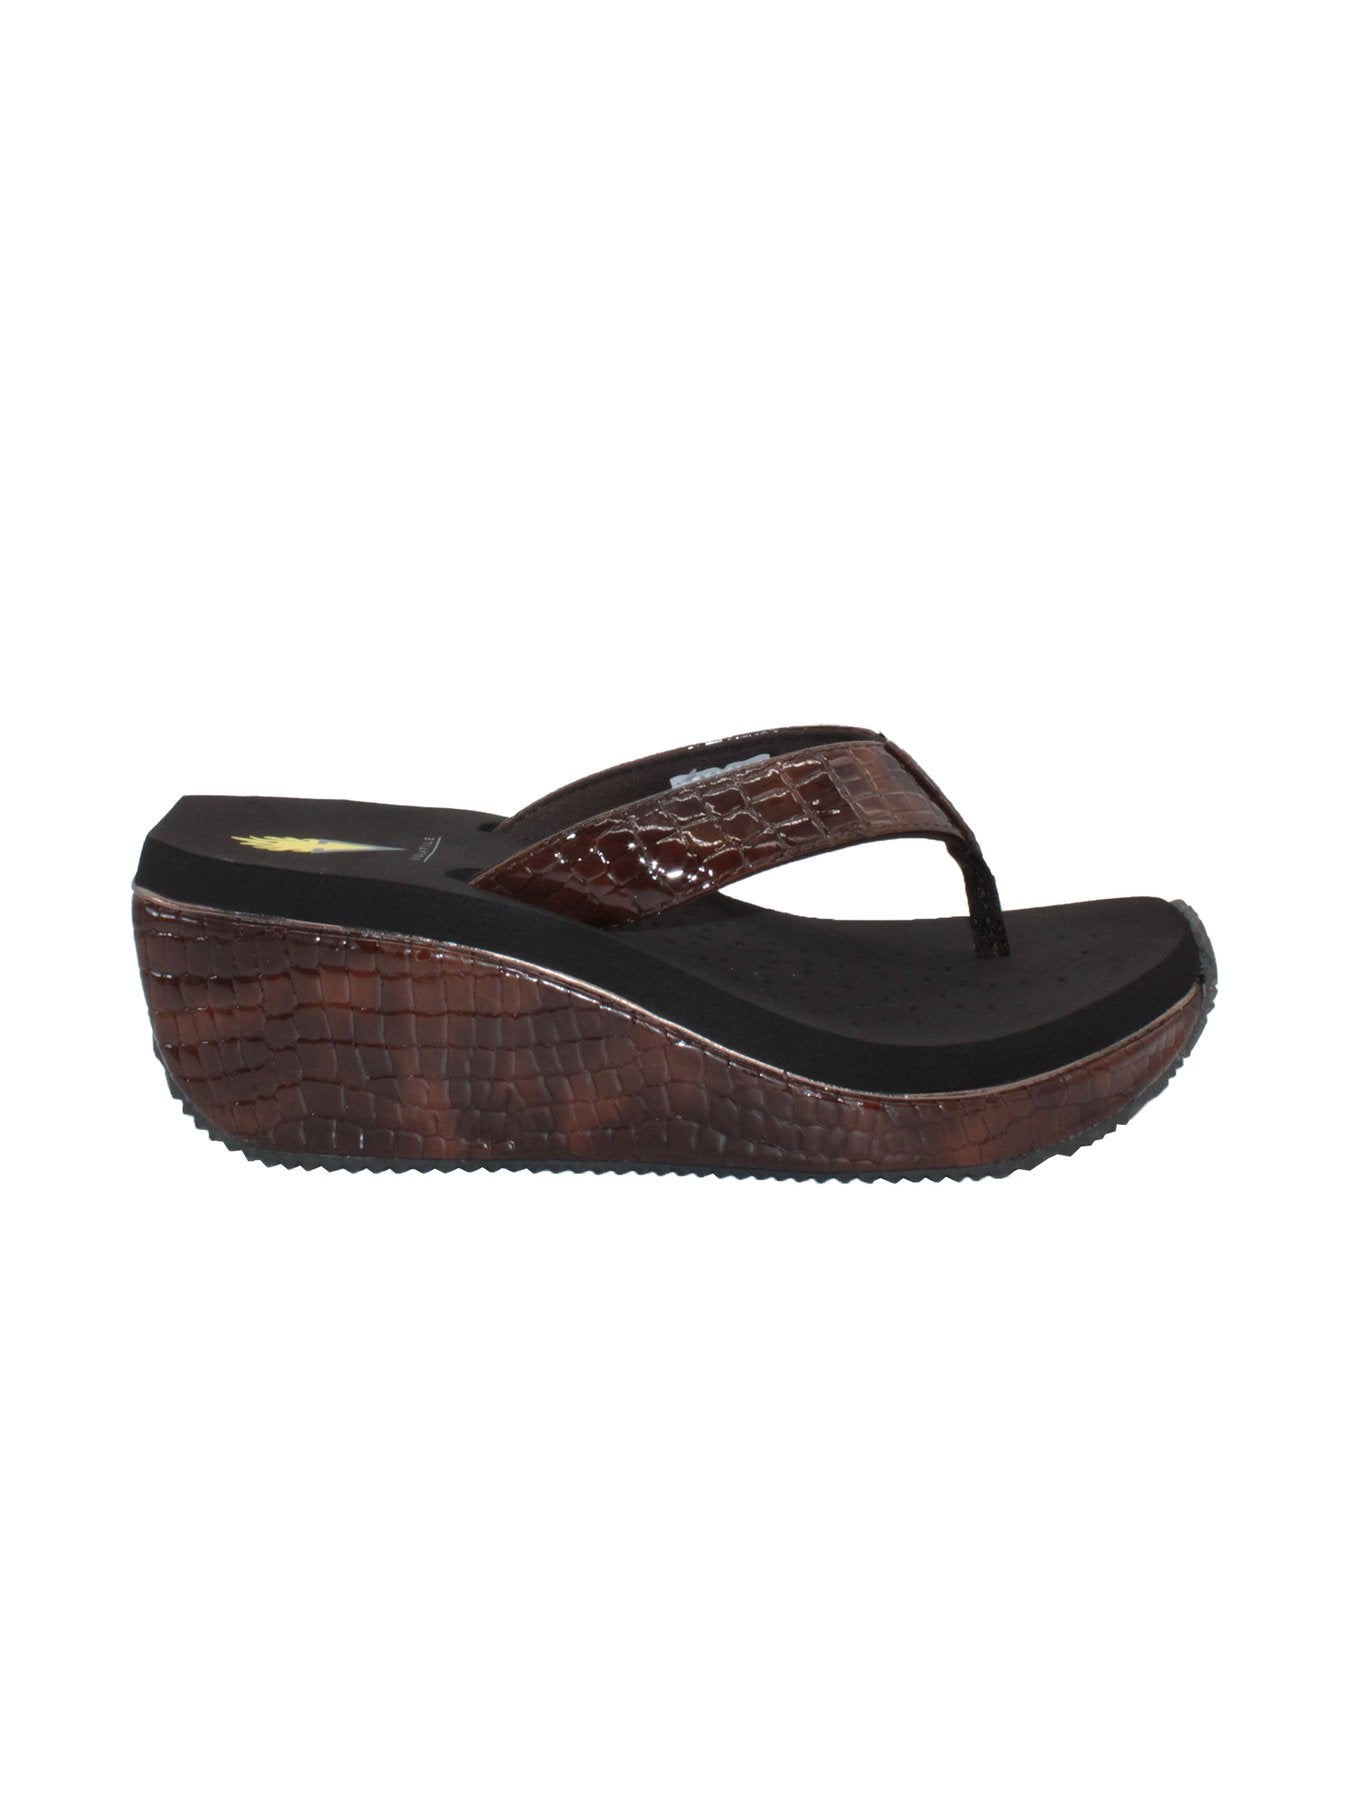 Volatile Shoes Volatile Frappachino Leather Thong Sandal - Little Miss Muffin Children & Home